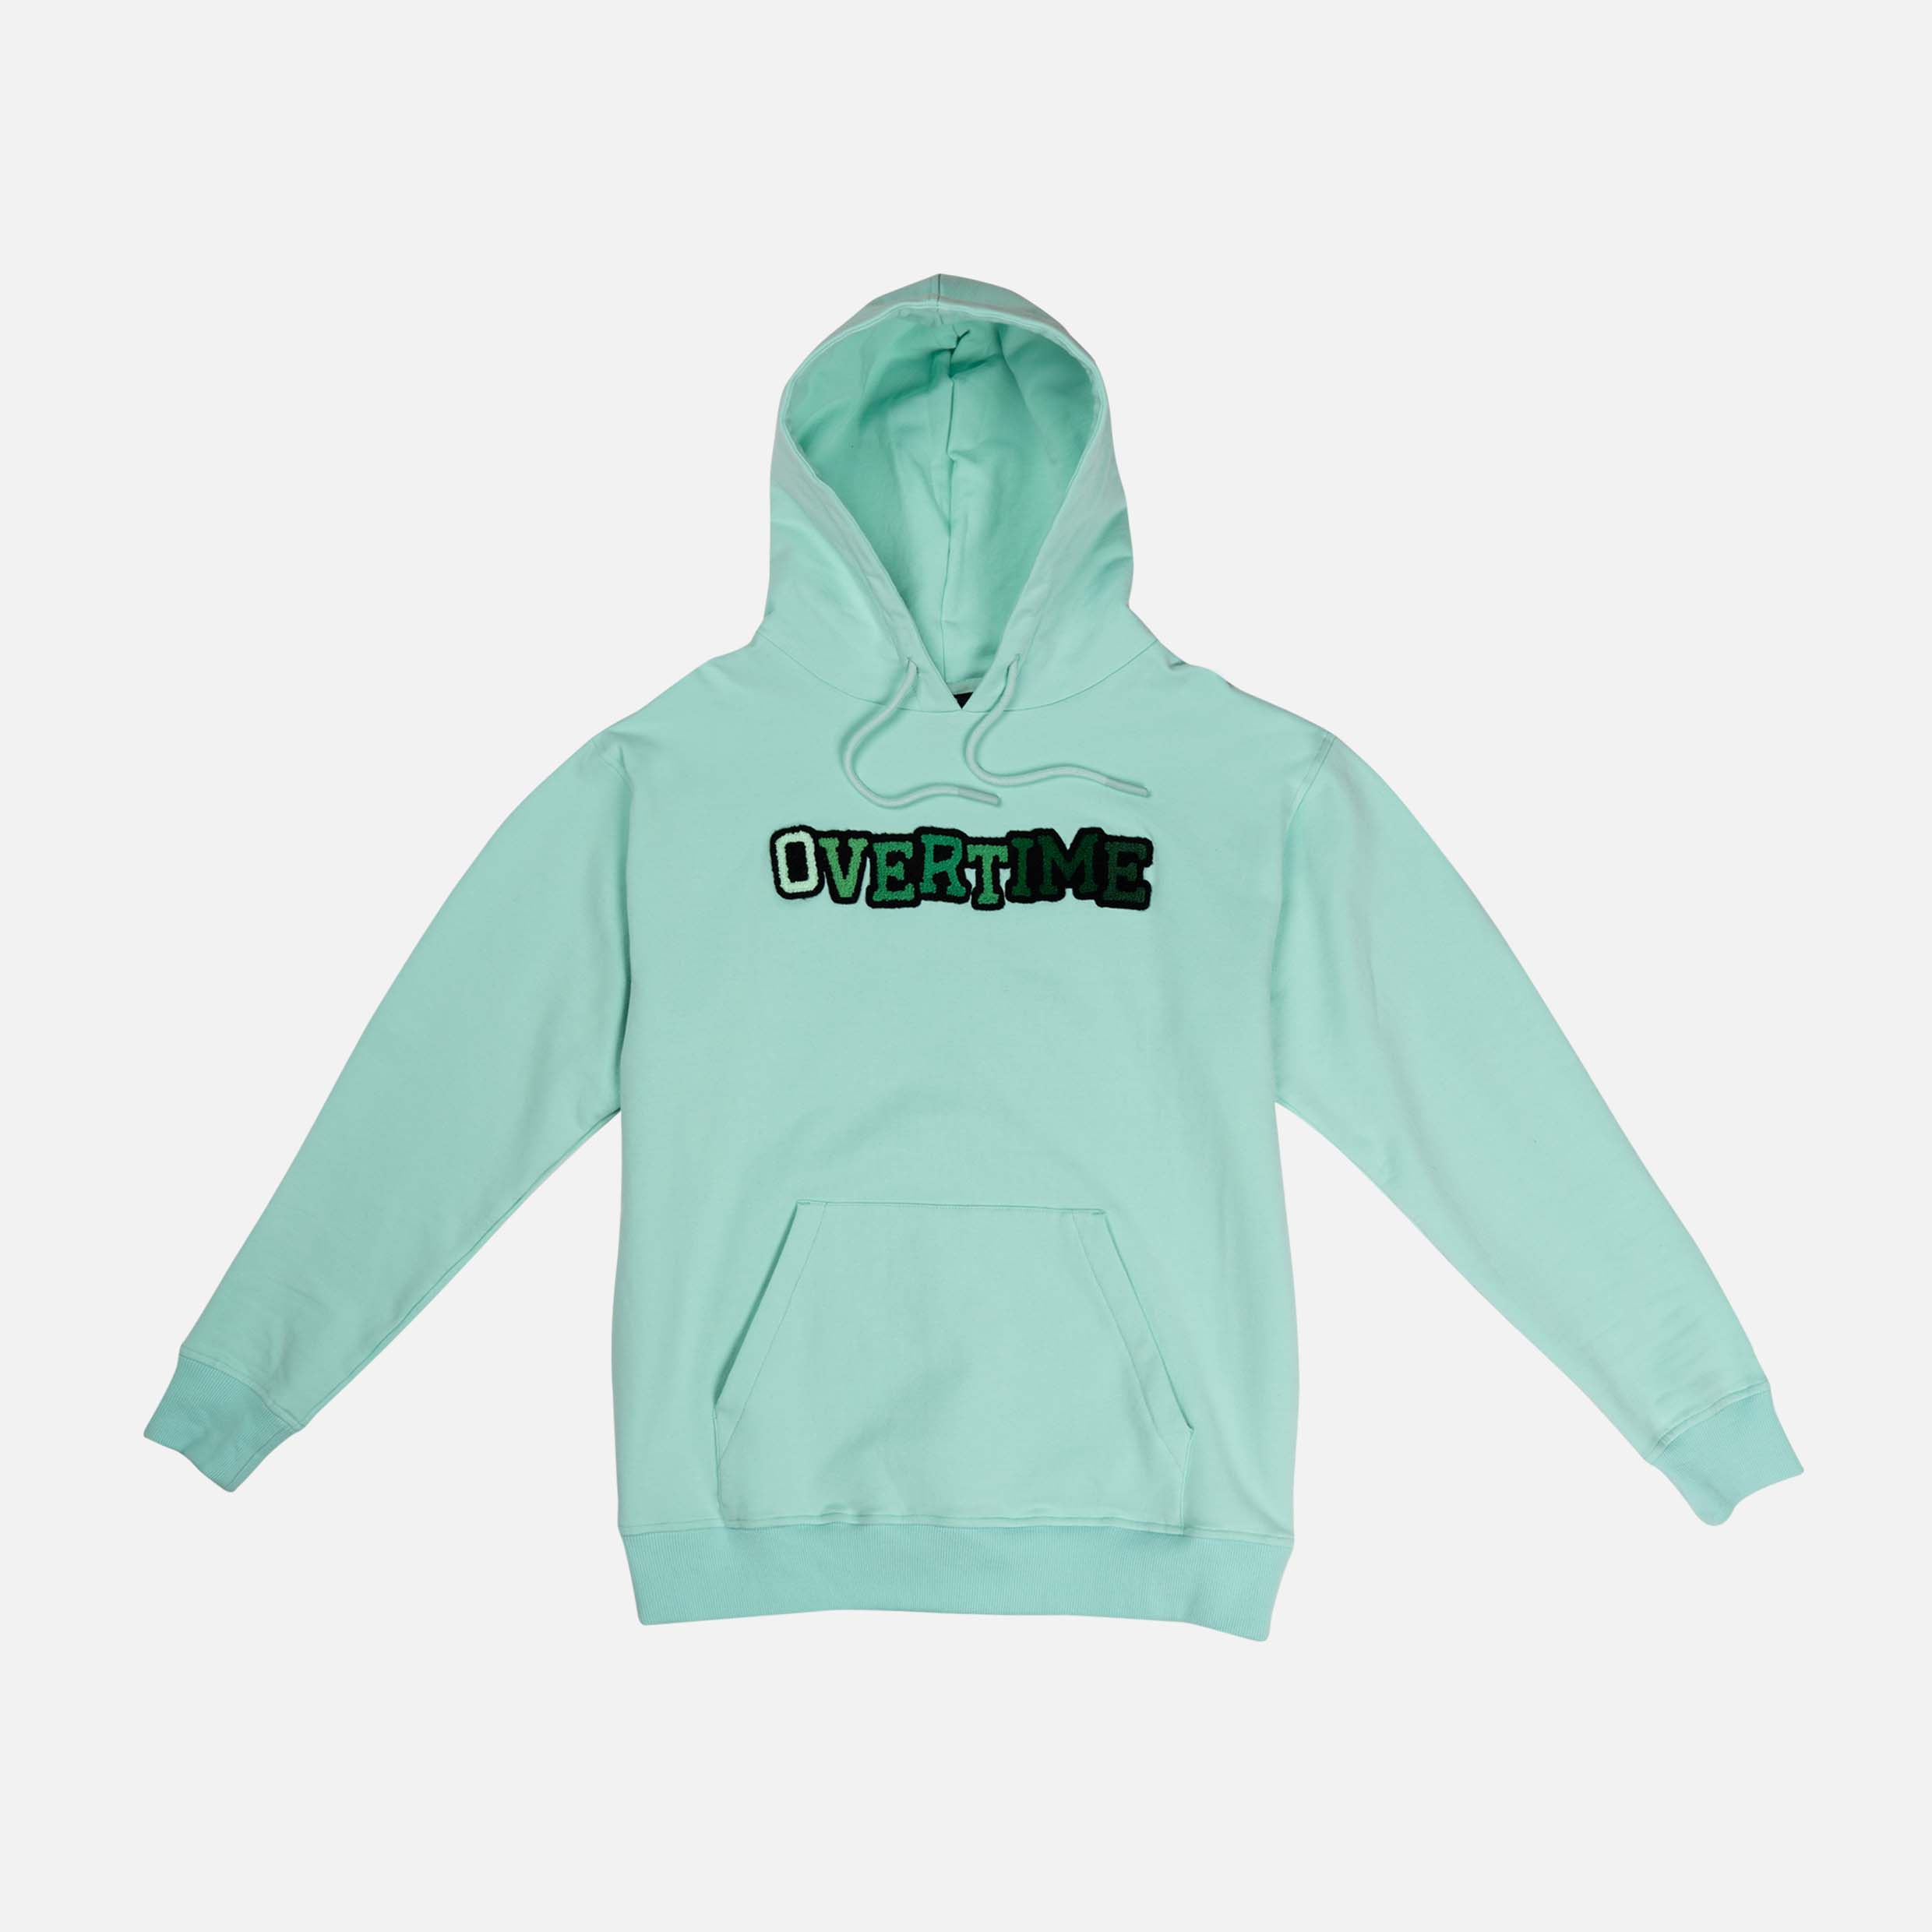 How to put on a hoodie?